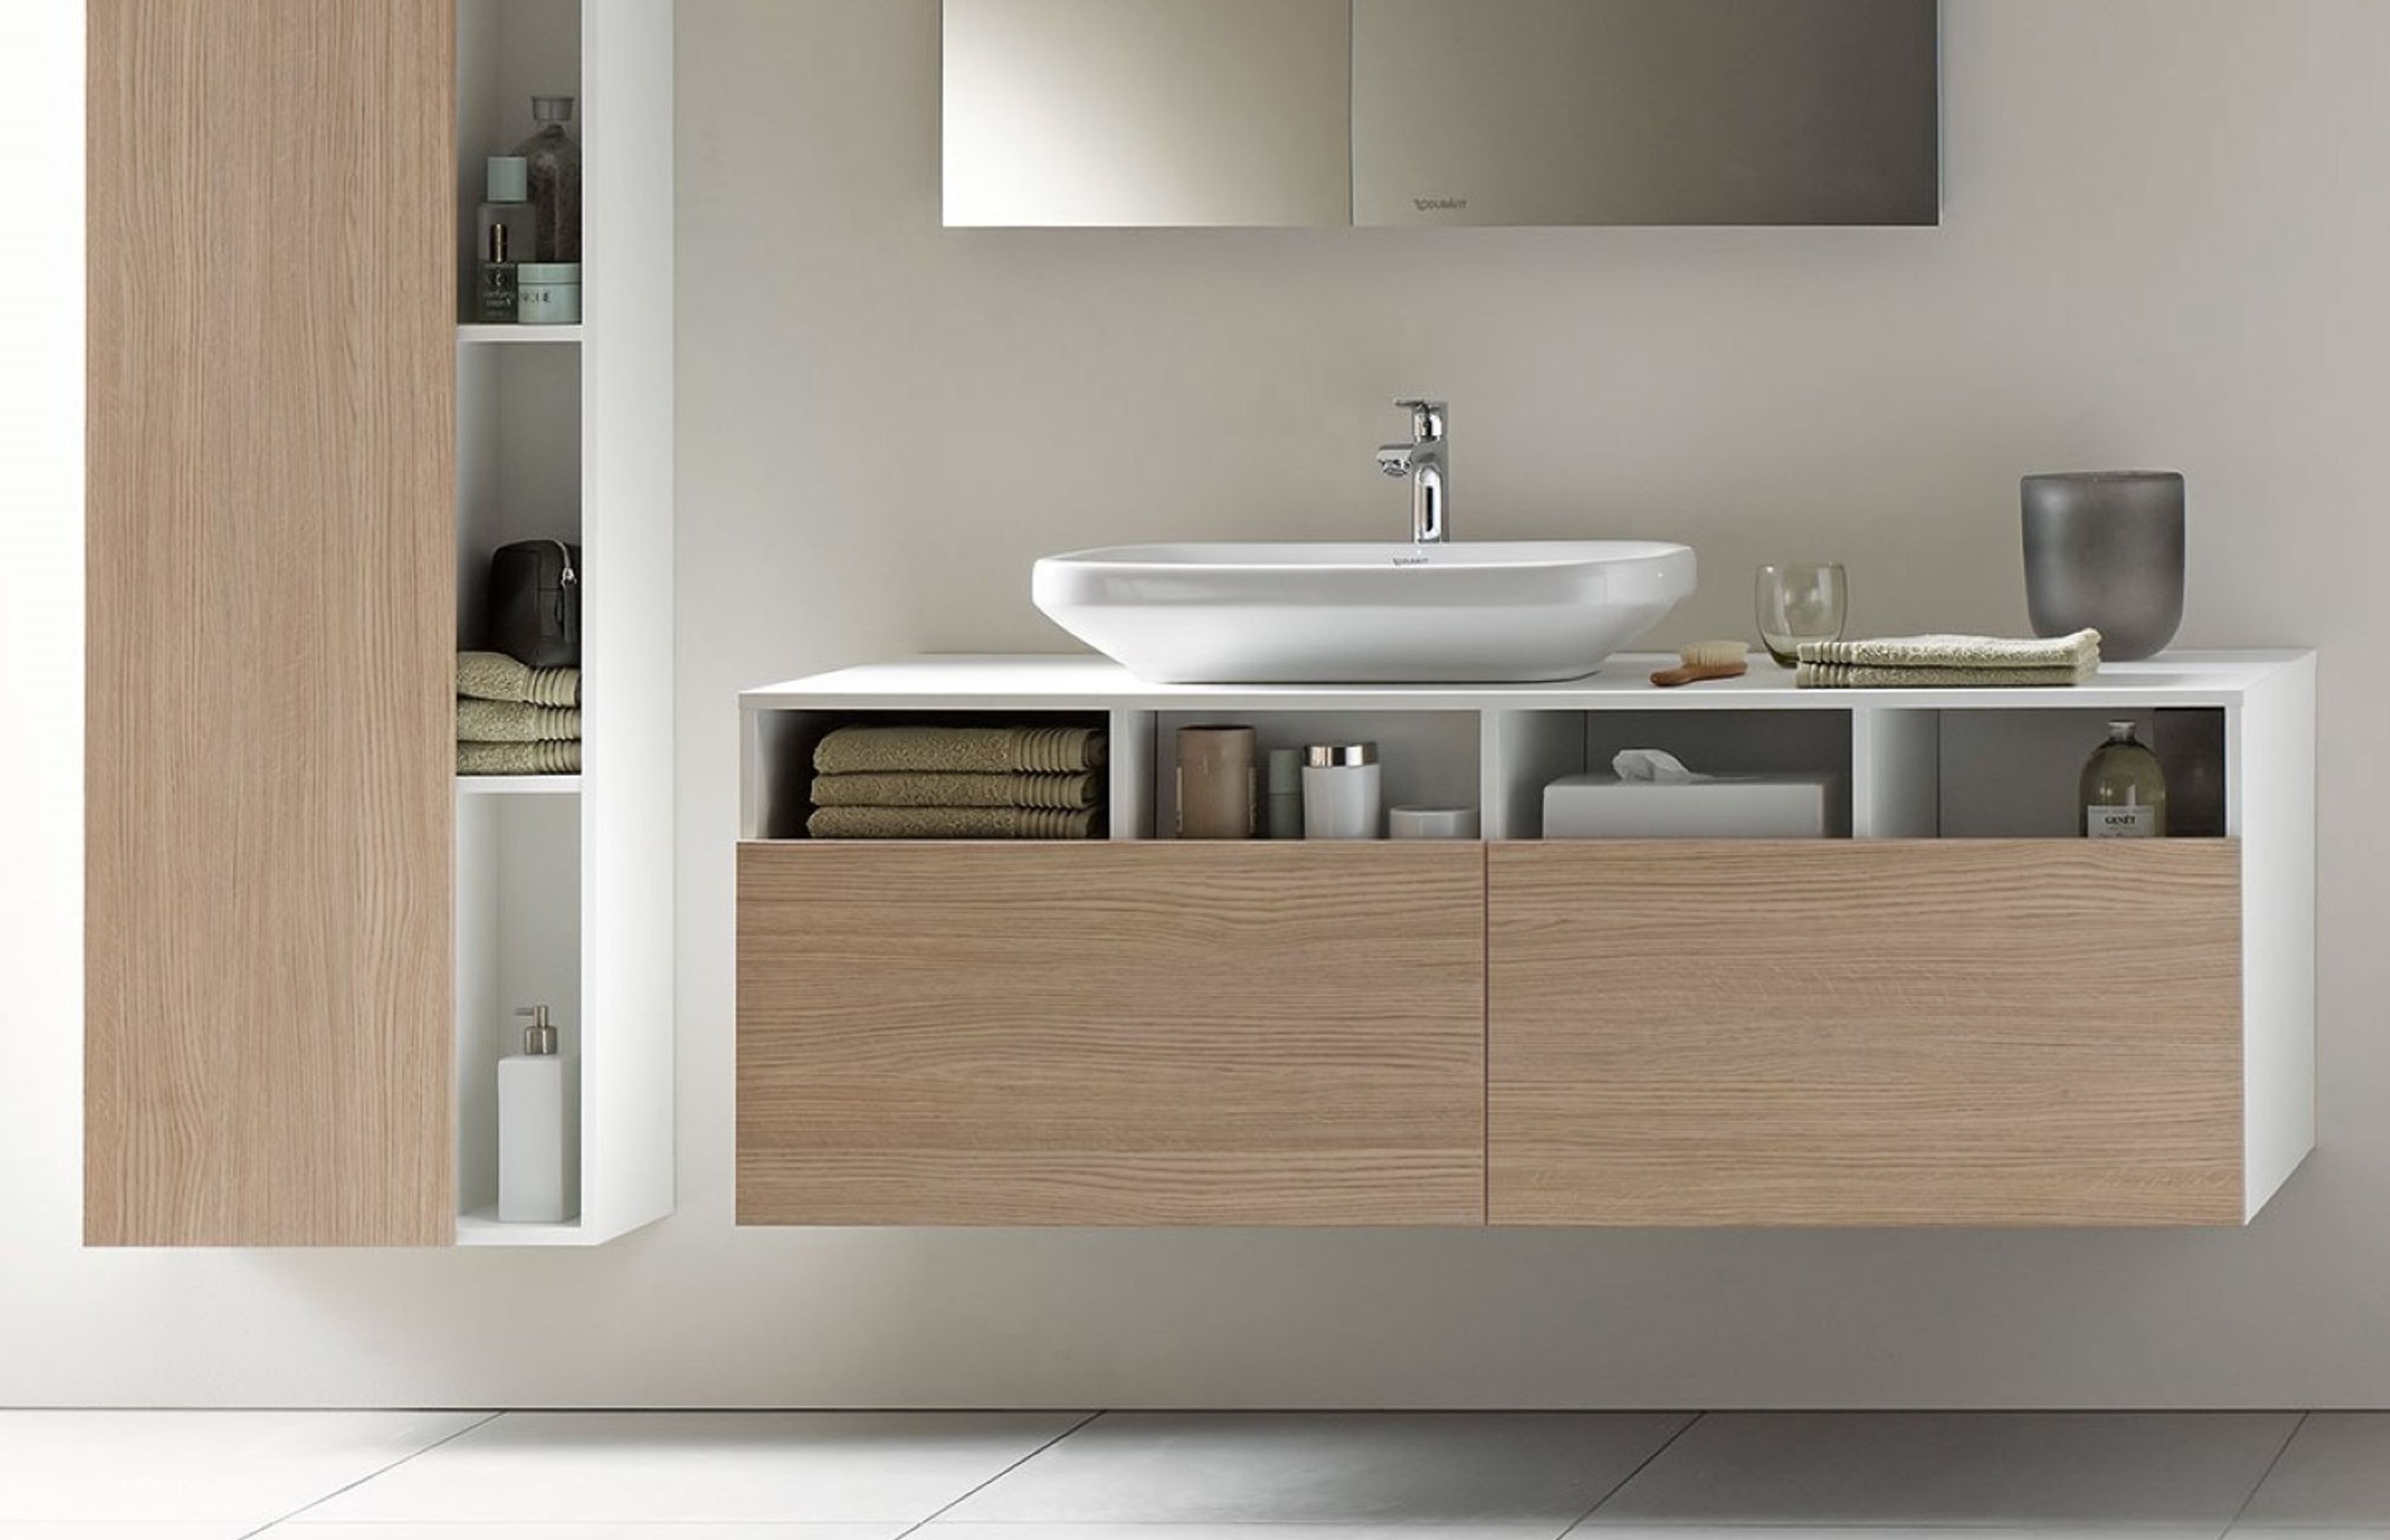 Prioritising high-quality bathroom linen is a must for a comfortable bathroom, especially when you've already acquired sublime features like the DuraStyle Basin by Duravit.